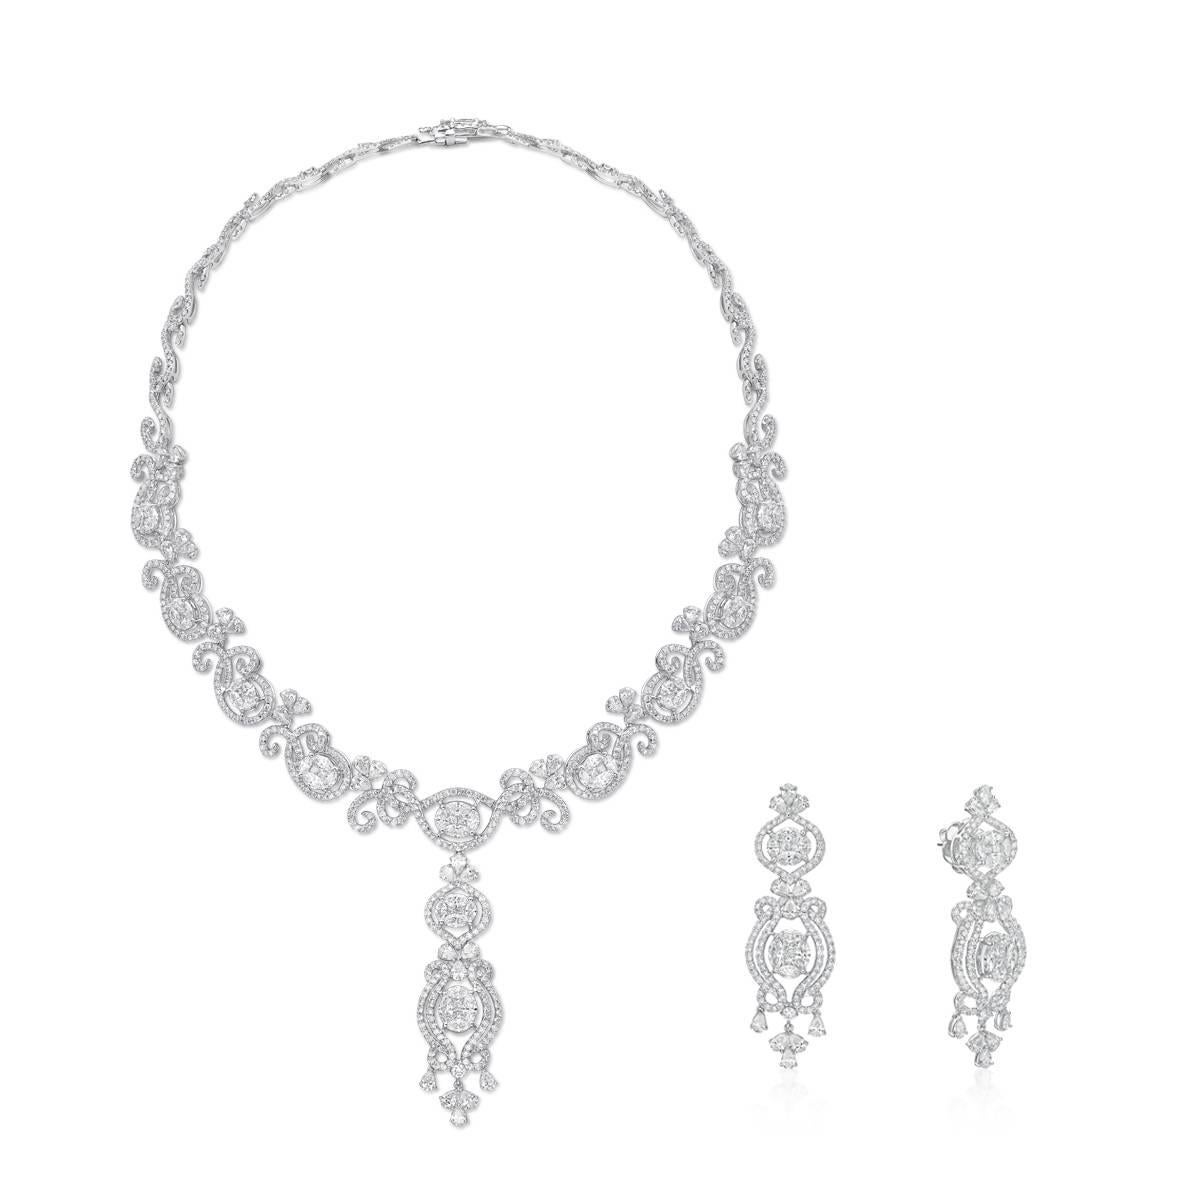 Absolutely stunning piece for formal parties.

Diamond details:
944 Diamond - 19.92 carat.
18K White Gold

*Matching earrings to be sold separately.